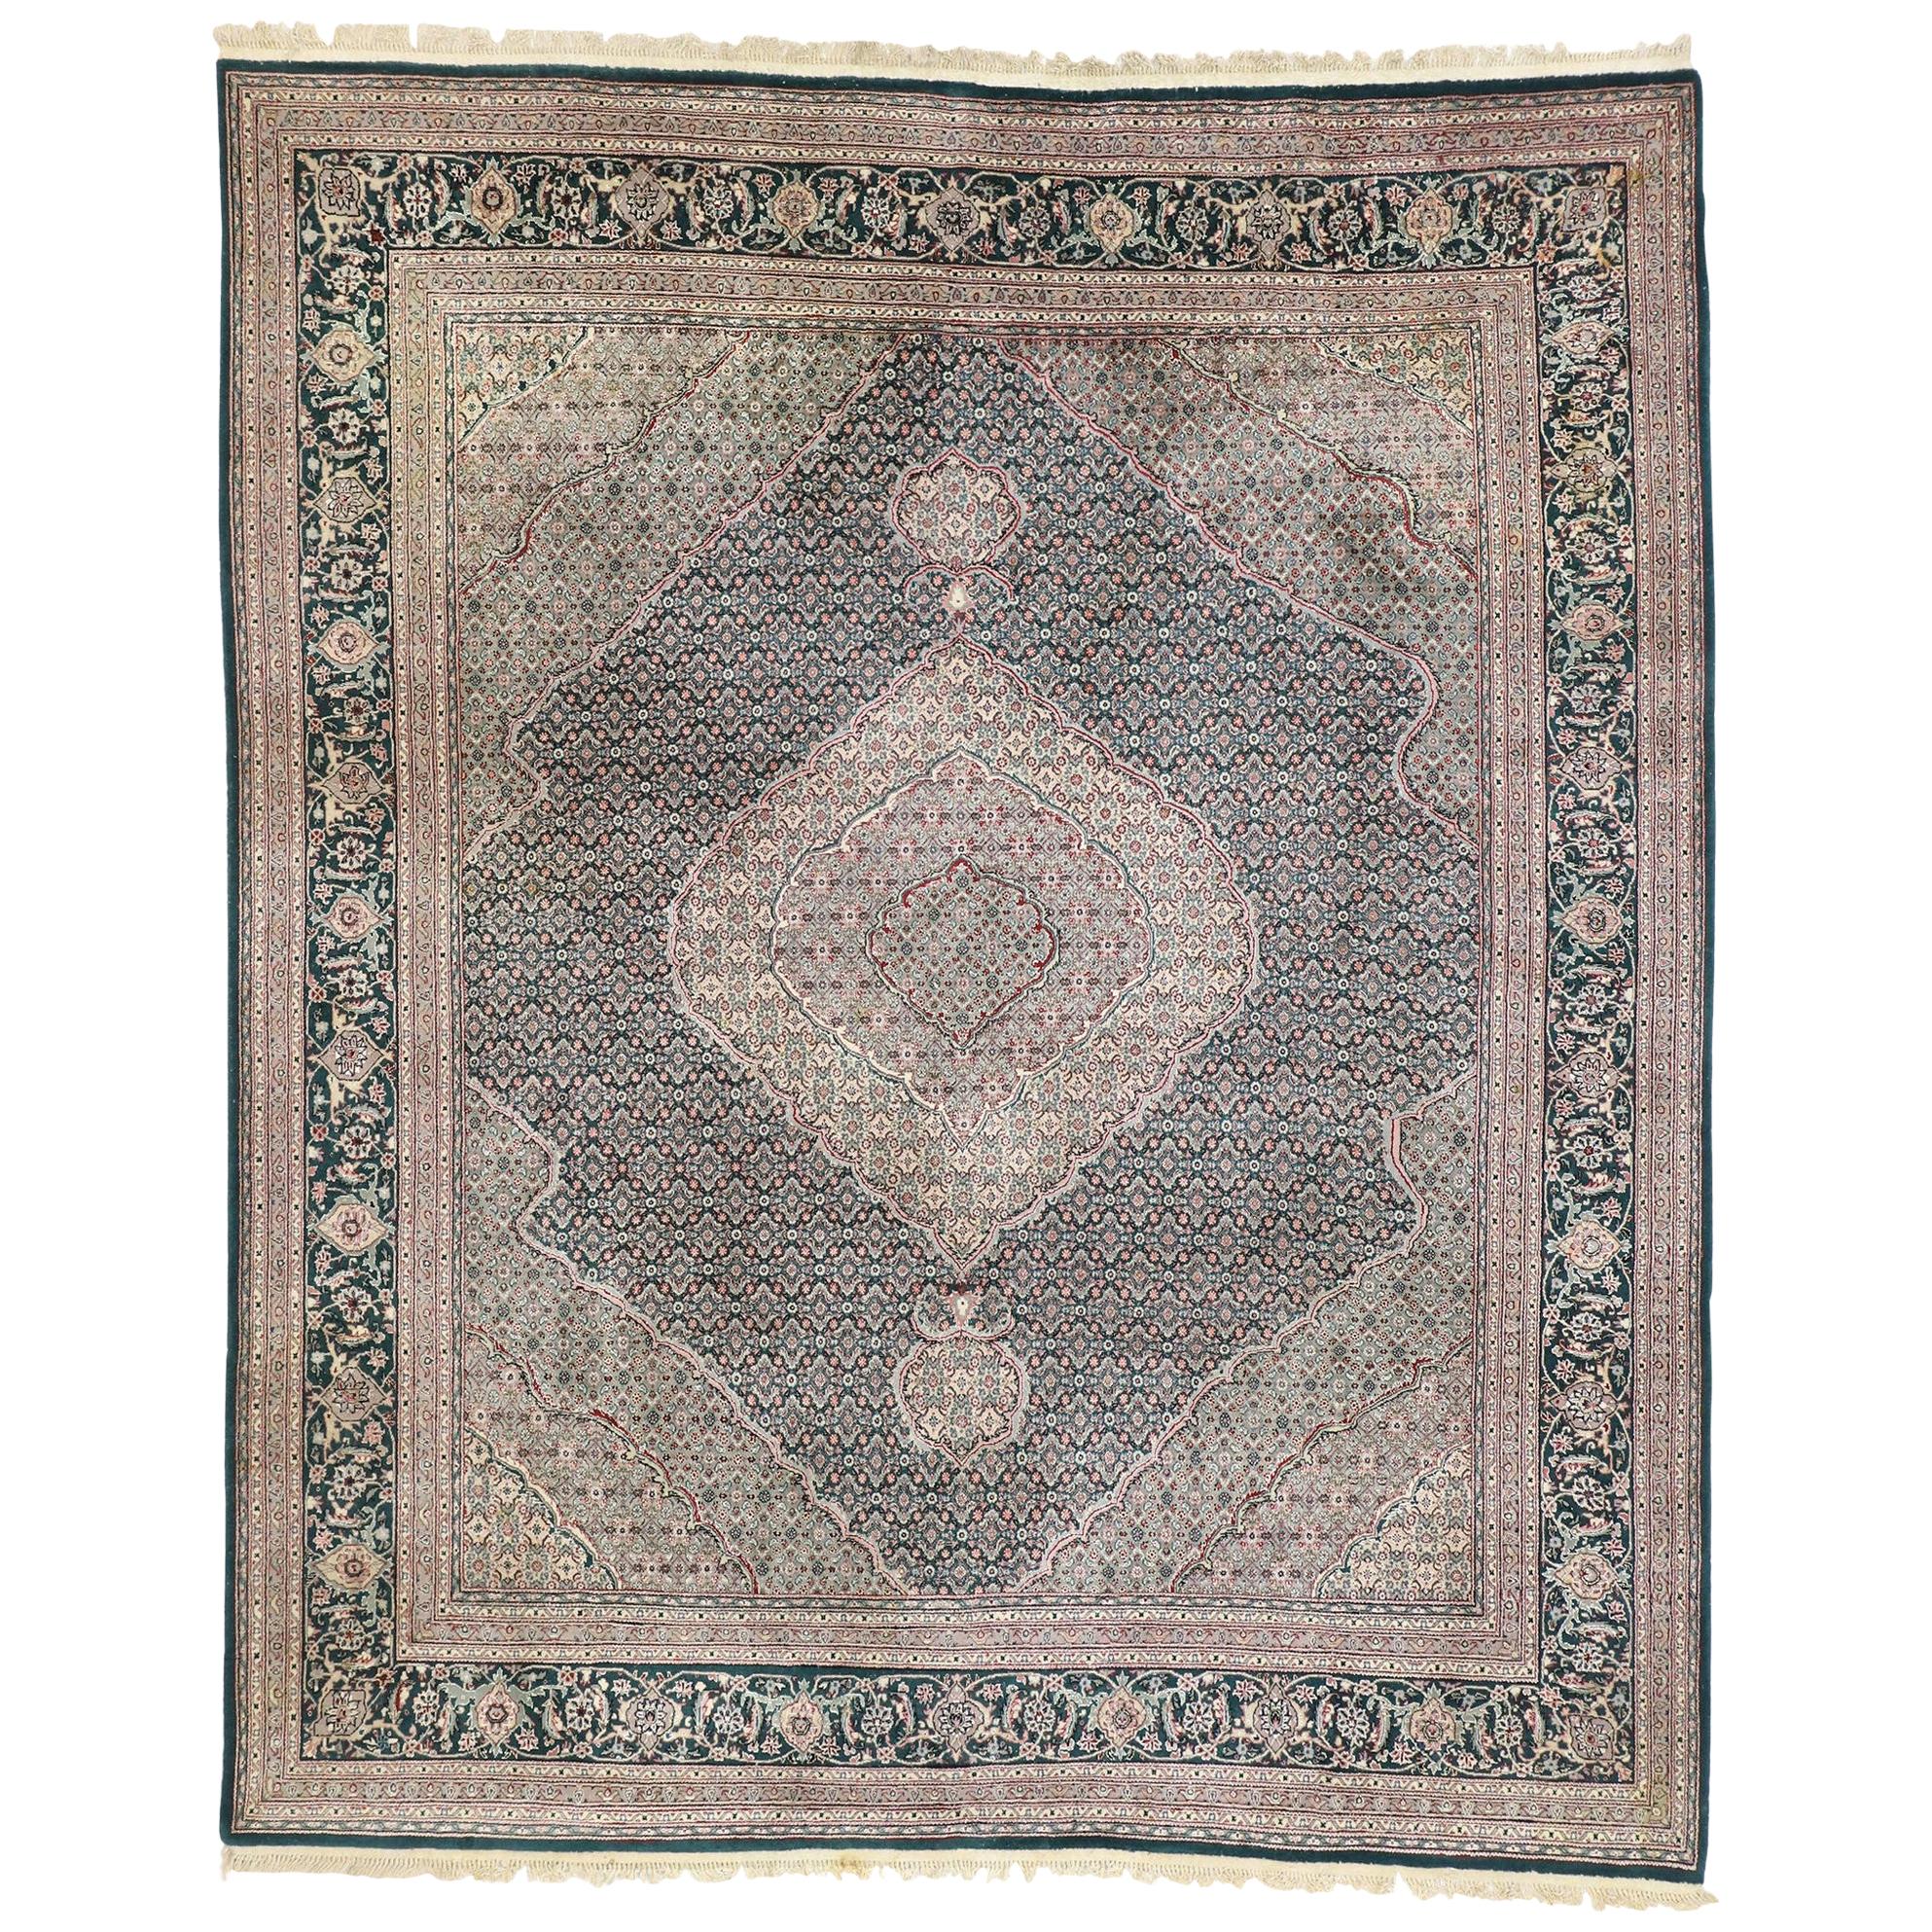 Vintage Chinese Persian Tabriz Rug with Mahi Fish Design and Old World Style For Sale